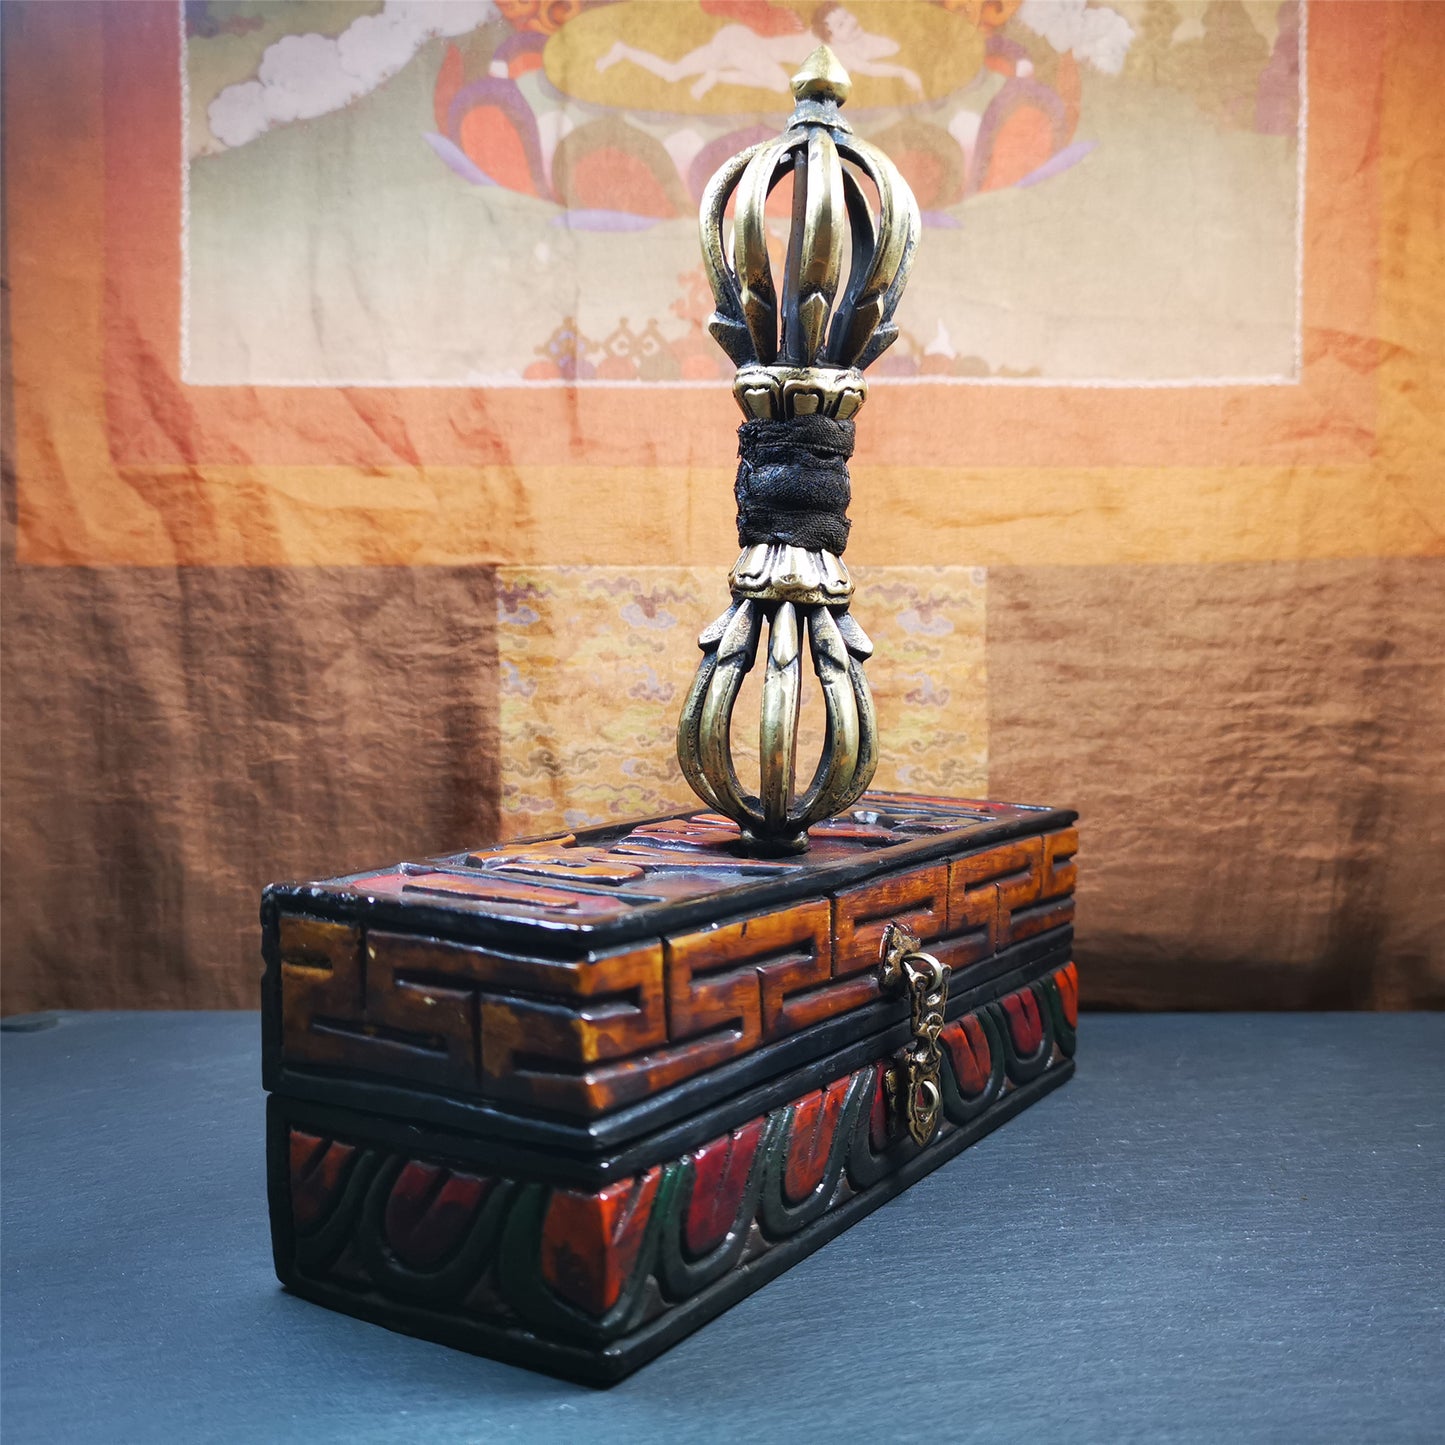 This vajra set was handmade in Nepal,using traditional techniques and materials. The Nine-pronged vajra is made of brass, and the outer box is made of wood,carved with the Tibetan letter of three karmas of word, thought , and deed The vajra can be inserted into the top of the box